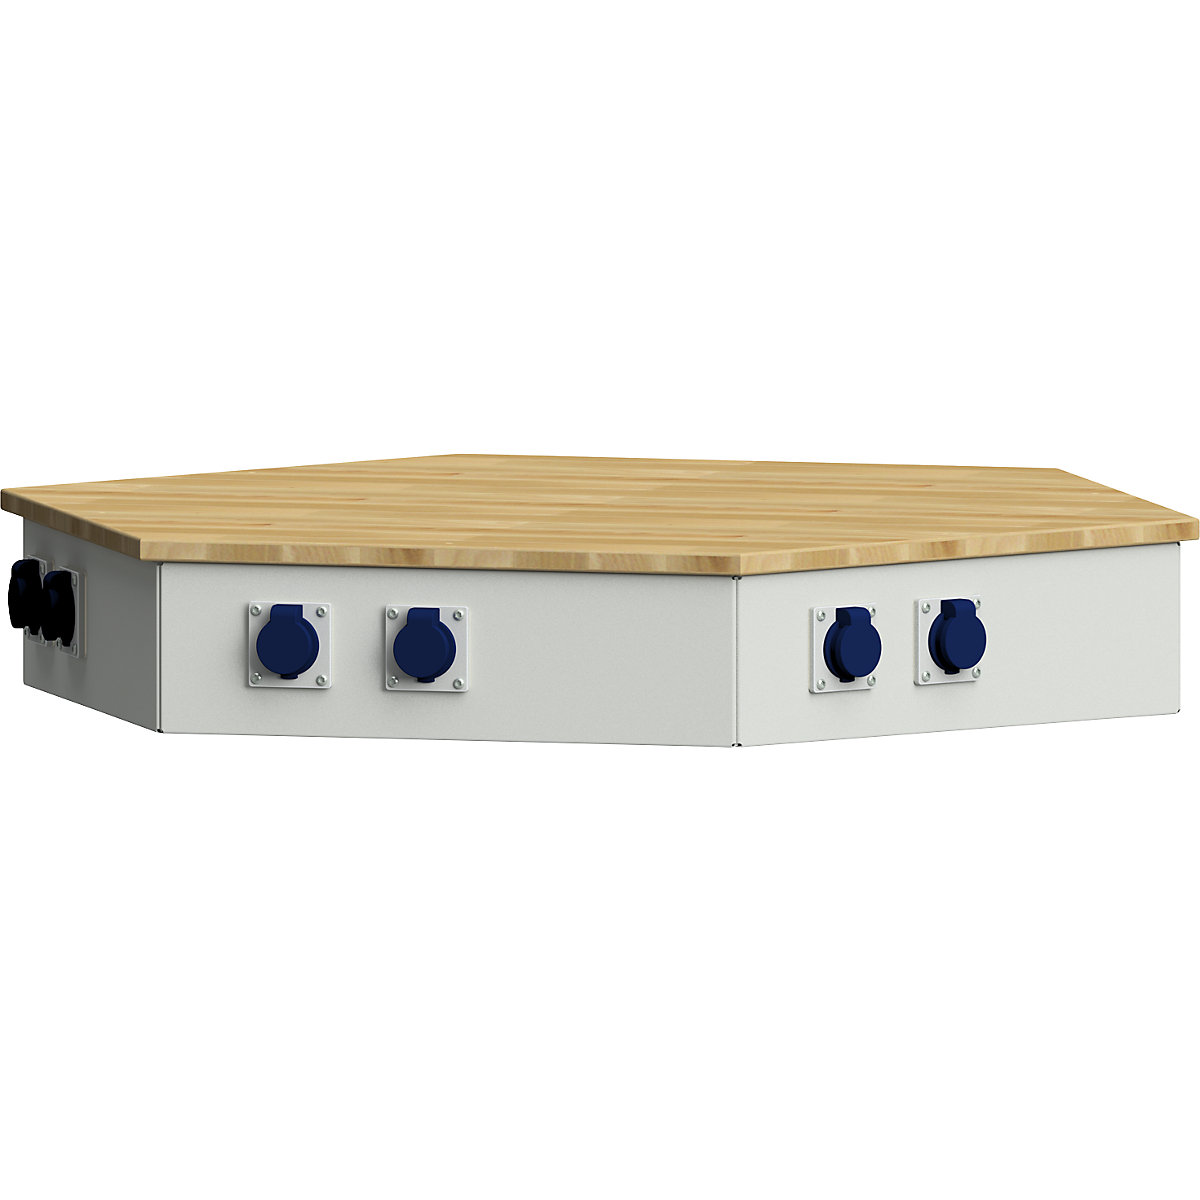 Power block for group workstations - ANKE